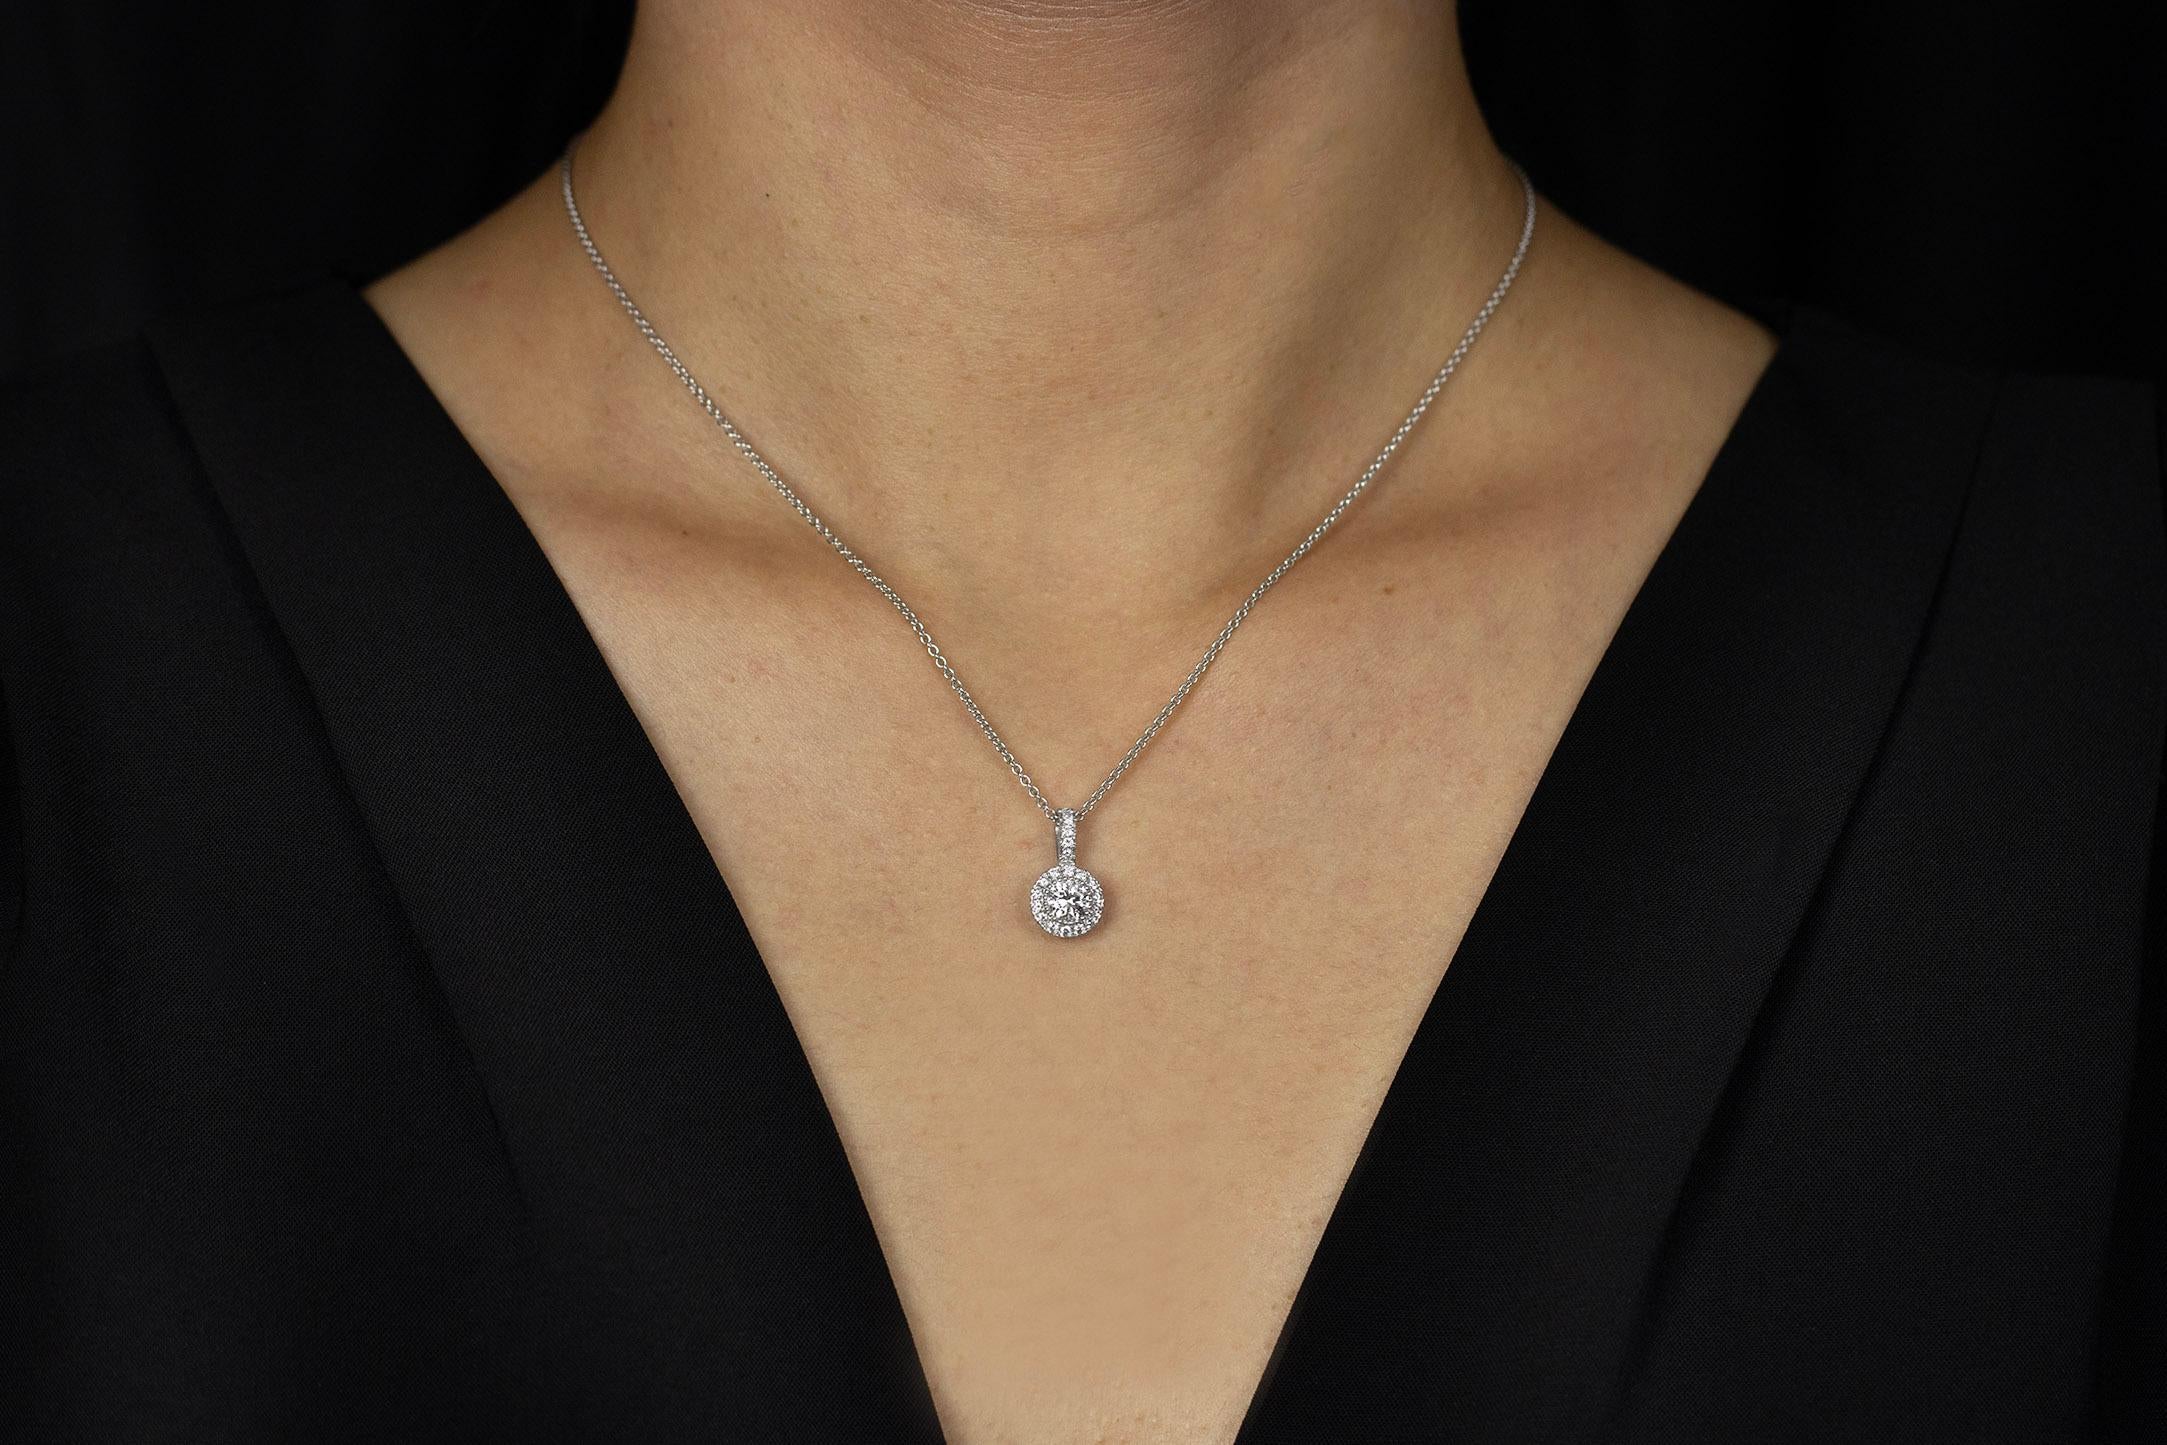 A simple pendant necklace that packs a lot of brilliance. Set with a 0.45 carats round diamond center set in a beaded bezel made with 14K white gold. The center diamond is surrounded by french pave-set diamonds for added radiance. Accent diamonds